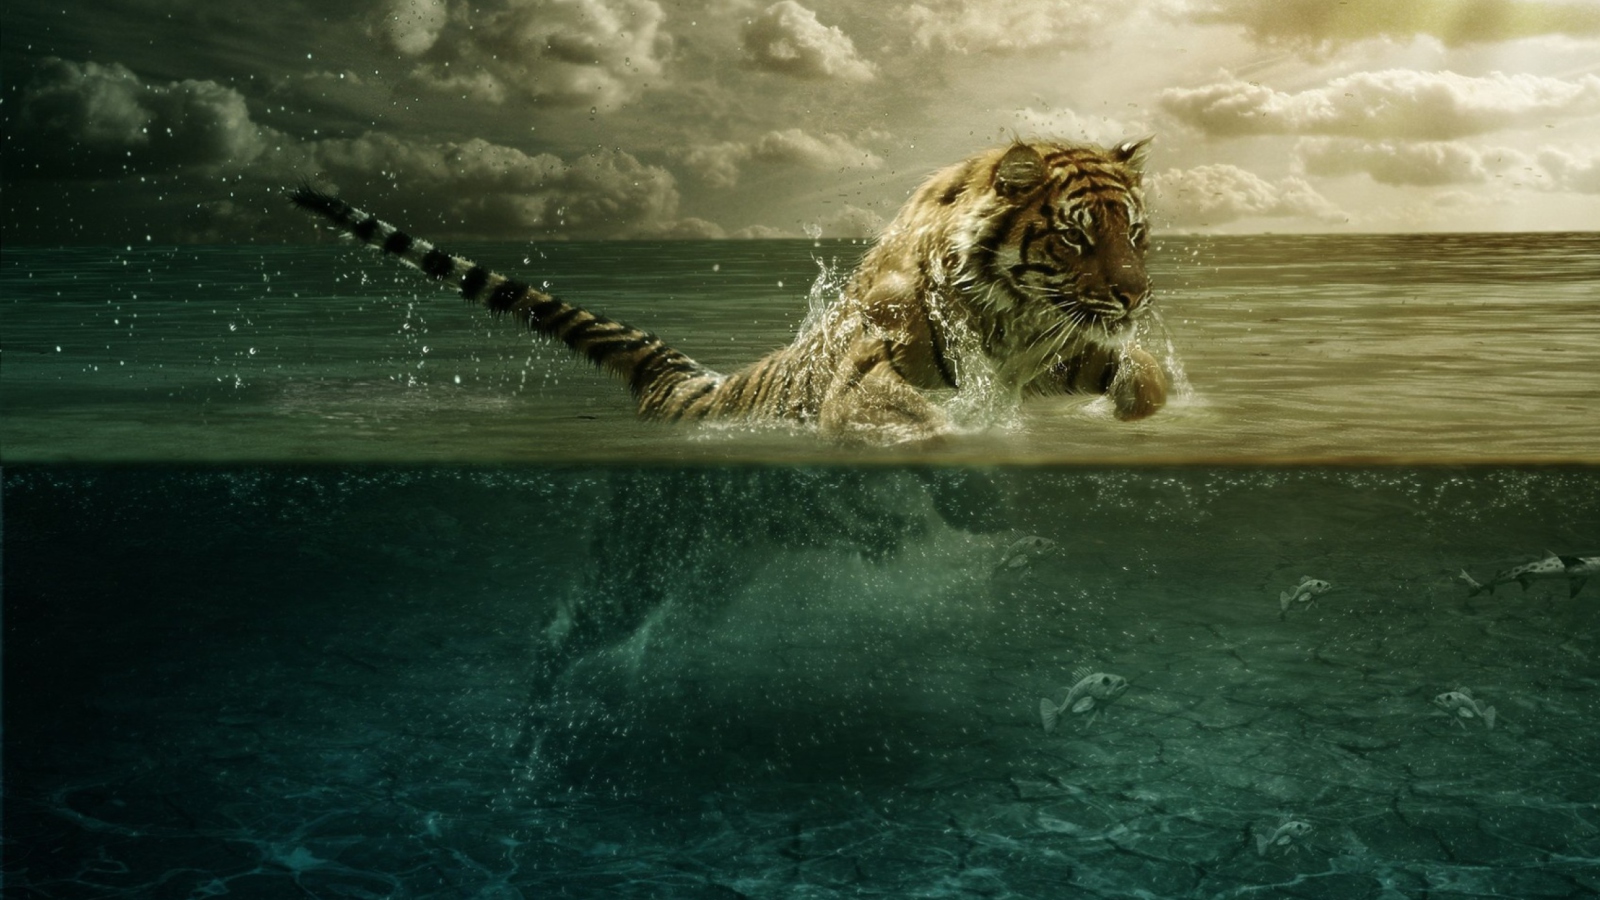 Tiger Jumping In Water wallpaper 1600x900